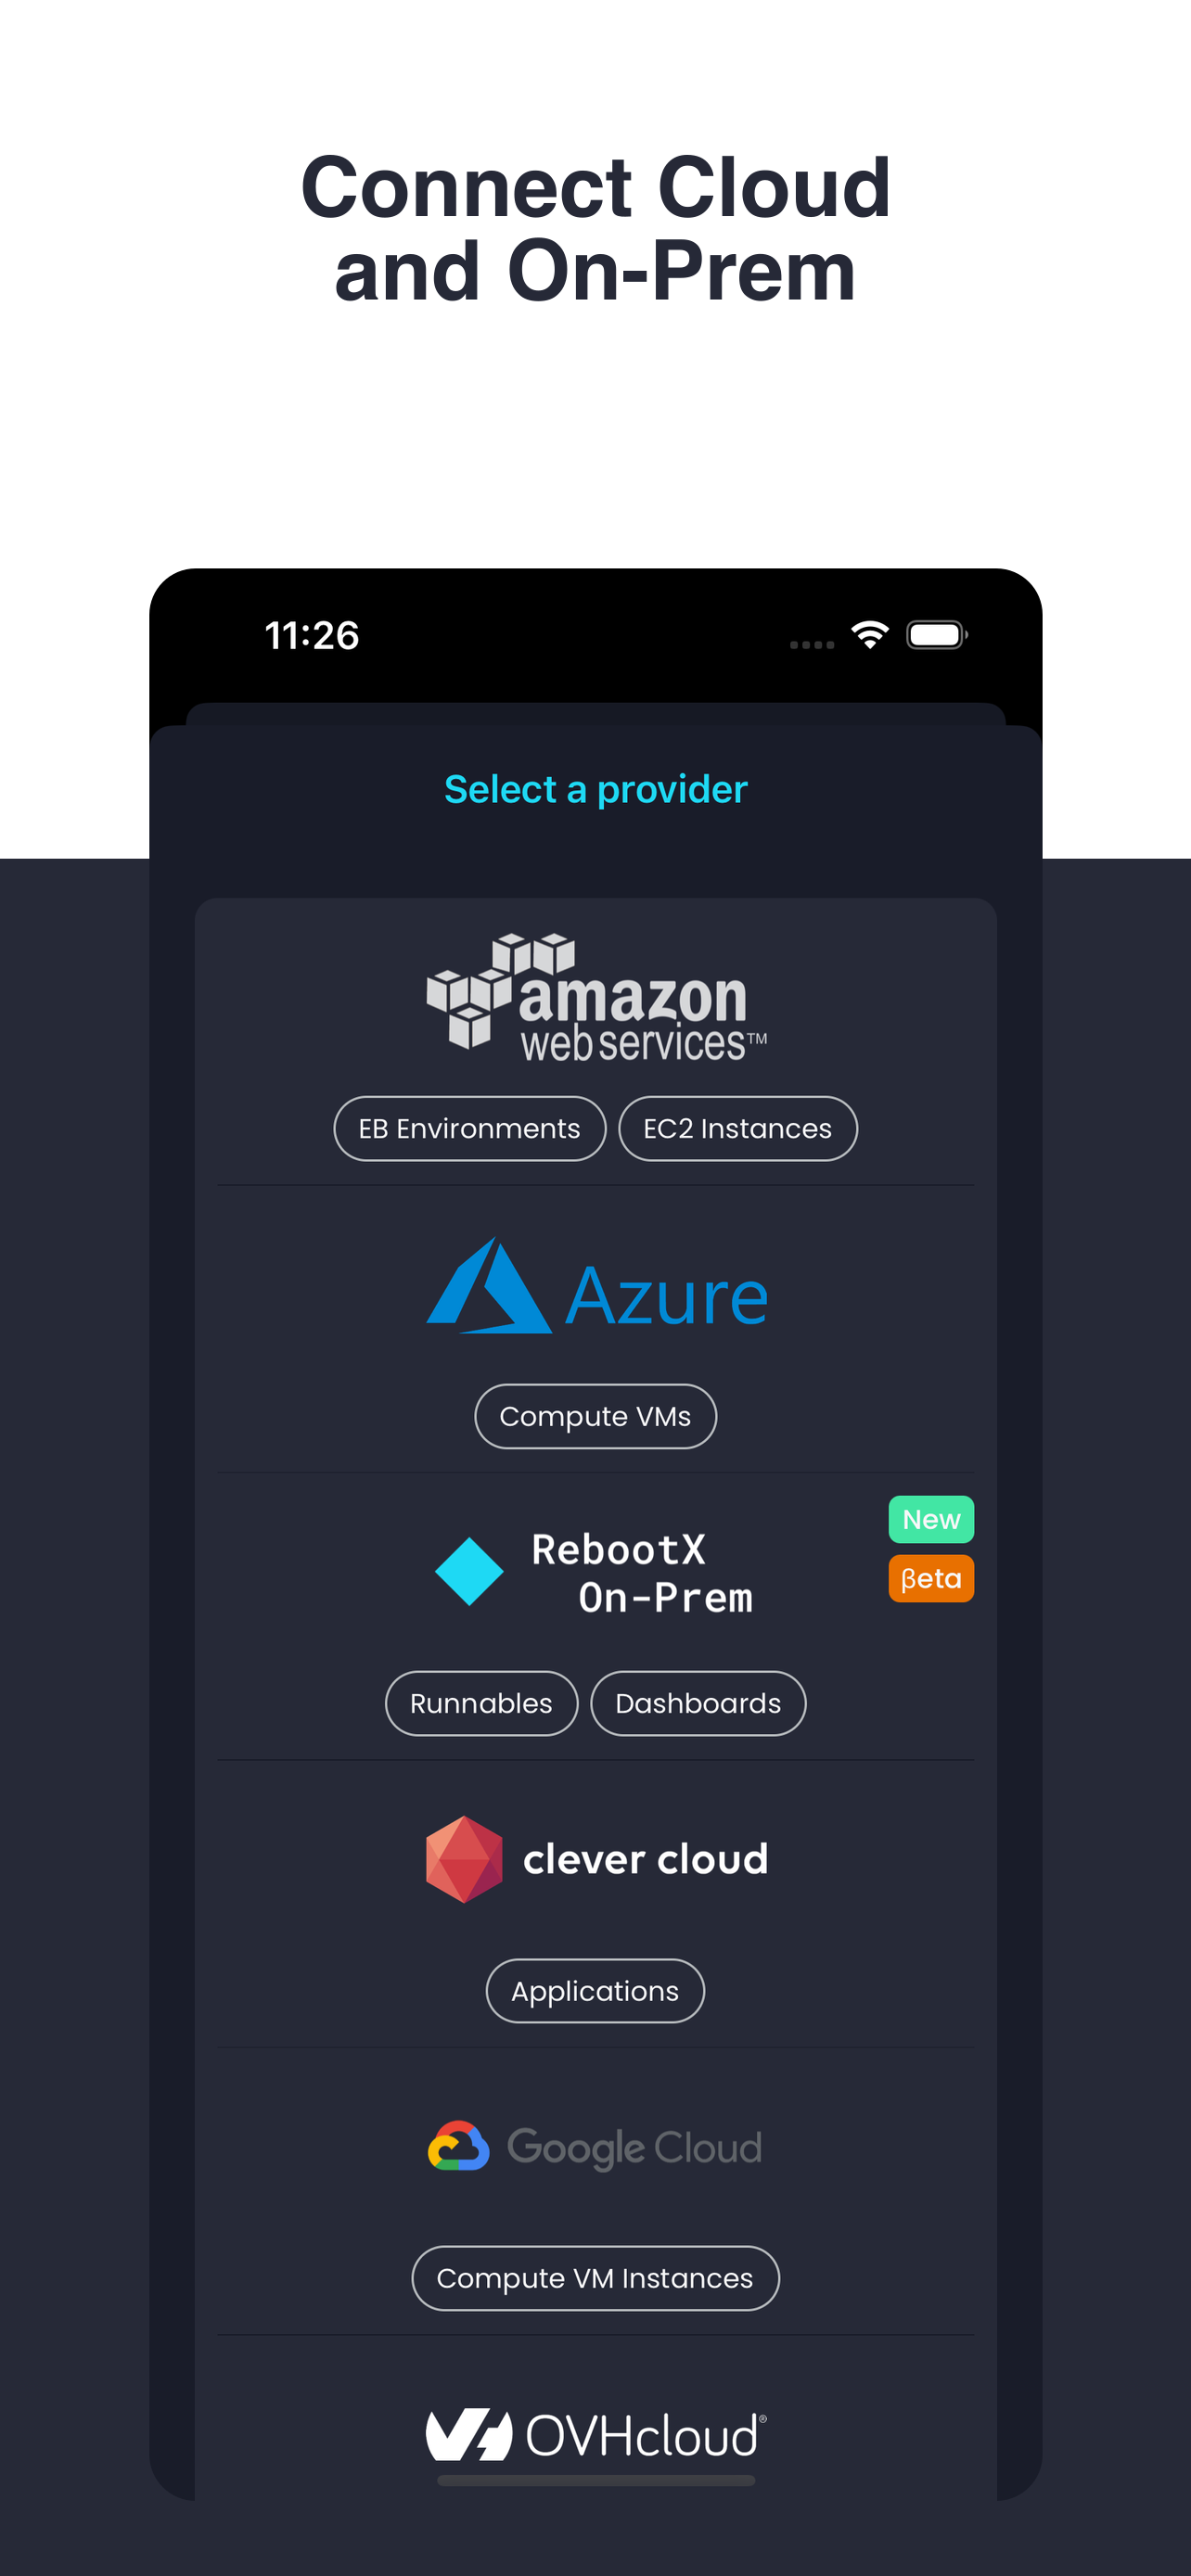 Connect Cloud and On-Prem